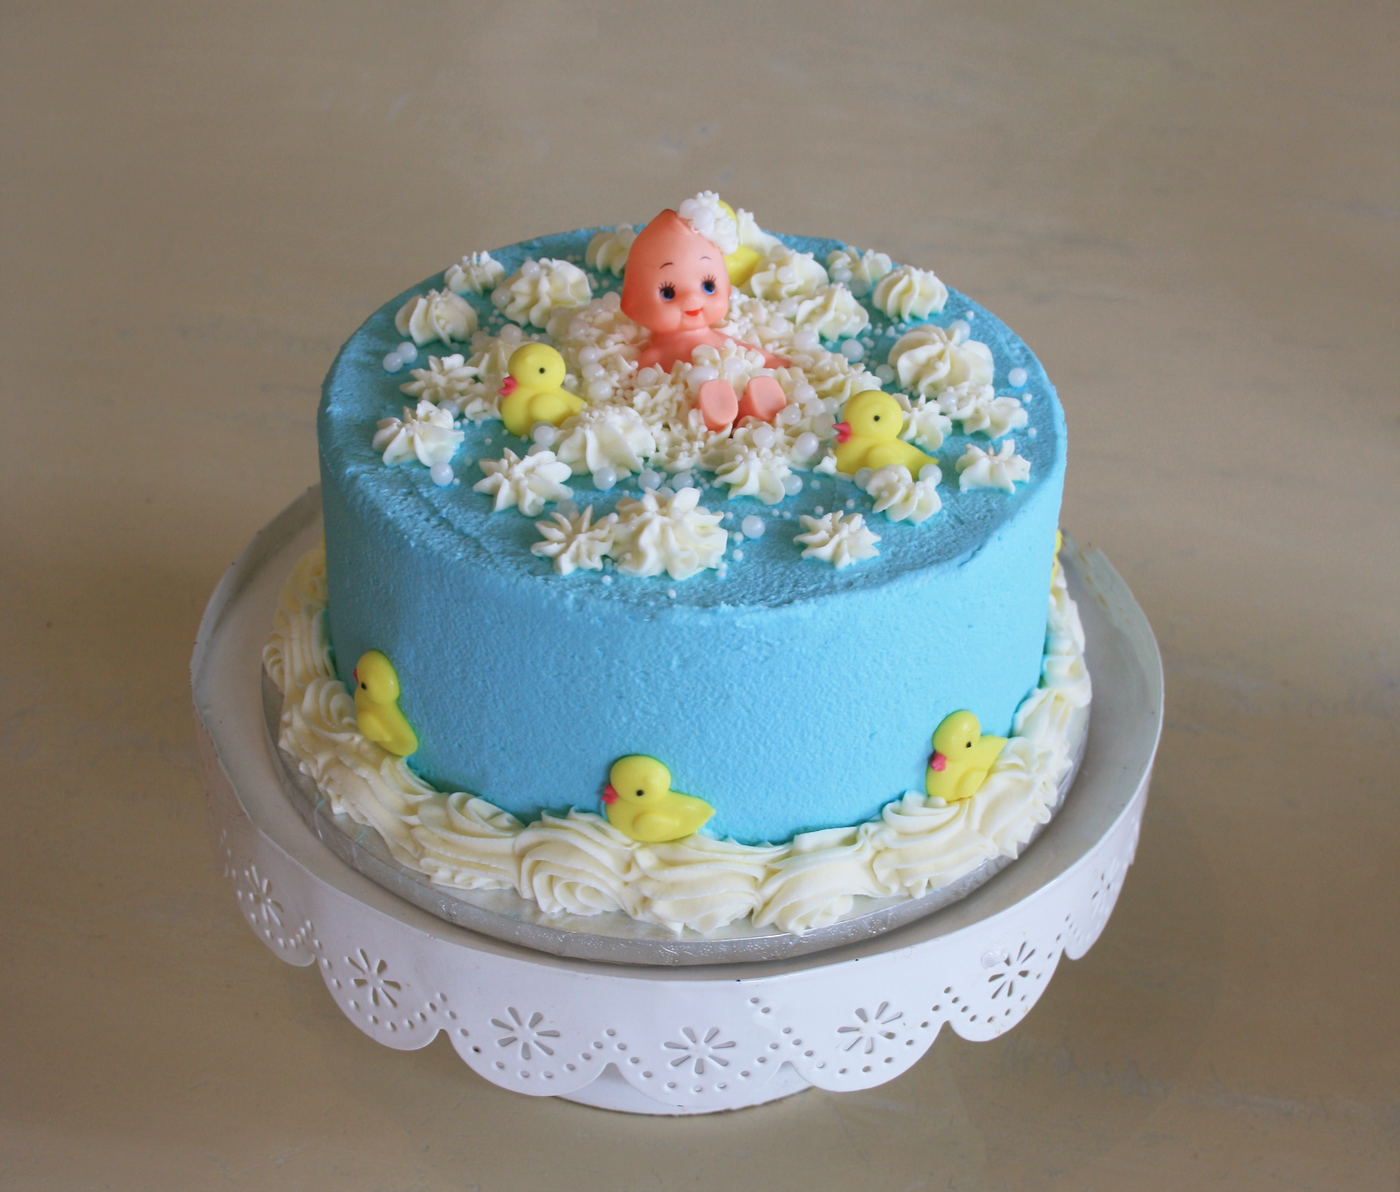 Baby in a Bath Cake!